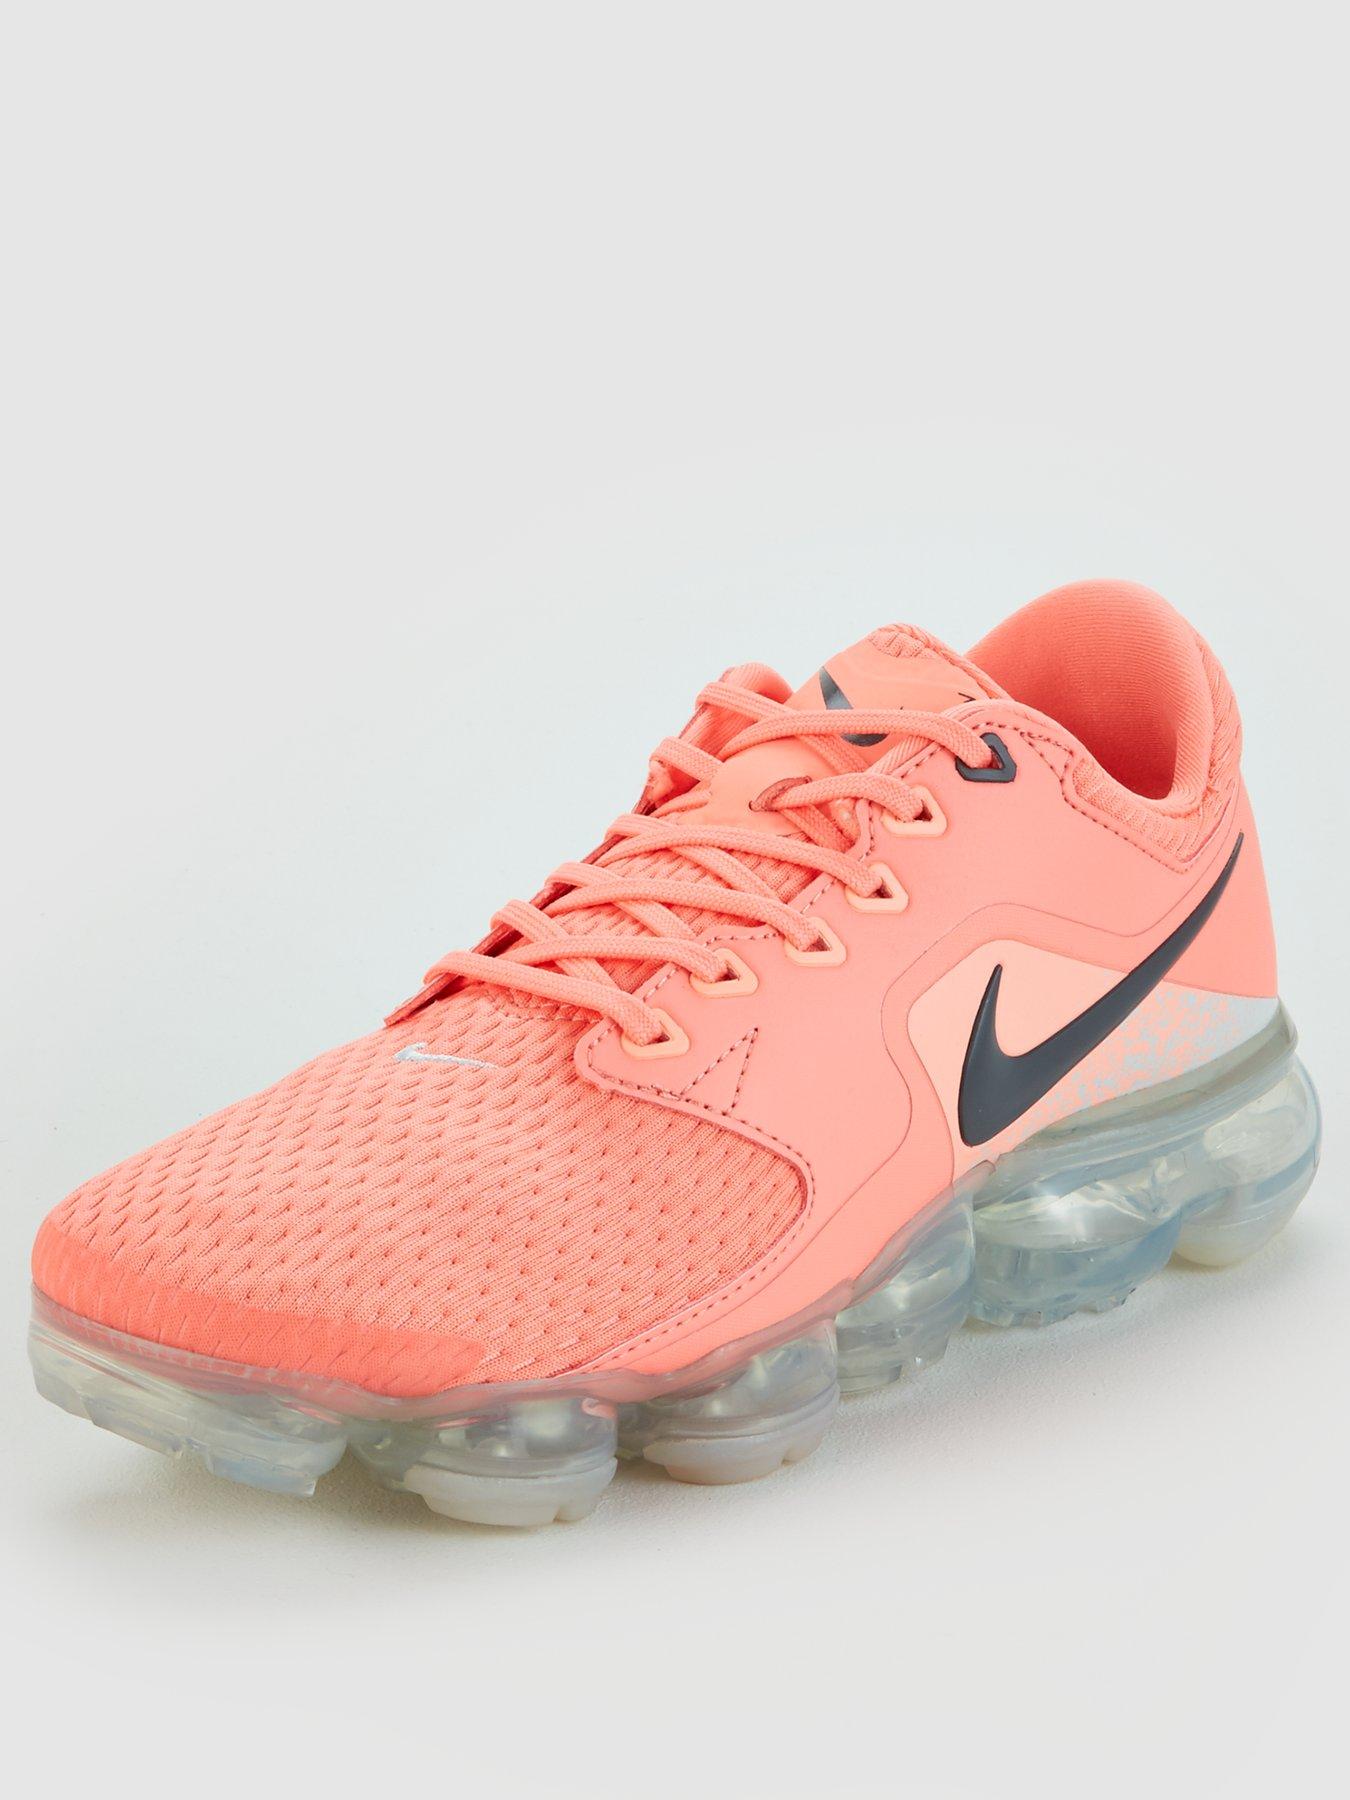 nike vapormax buy now pay later